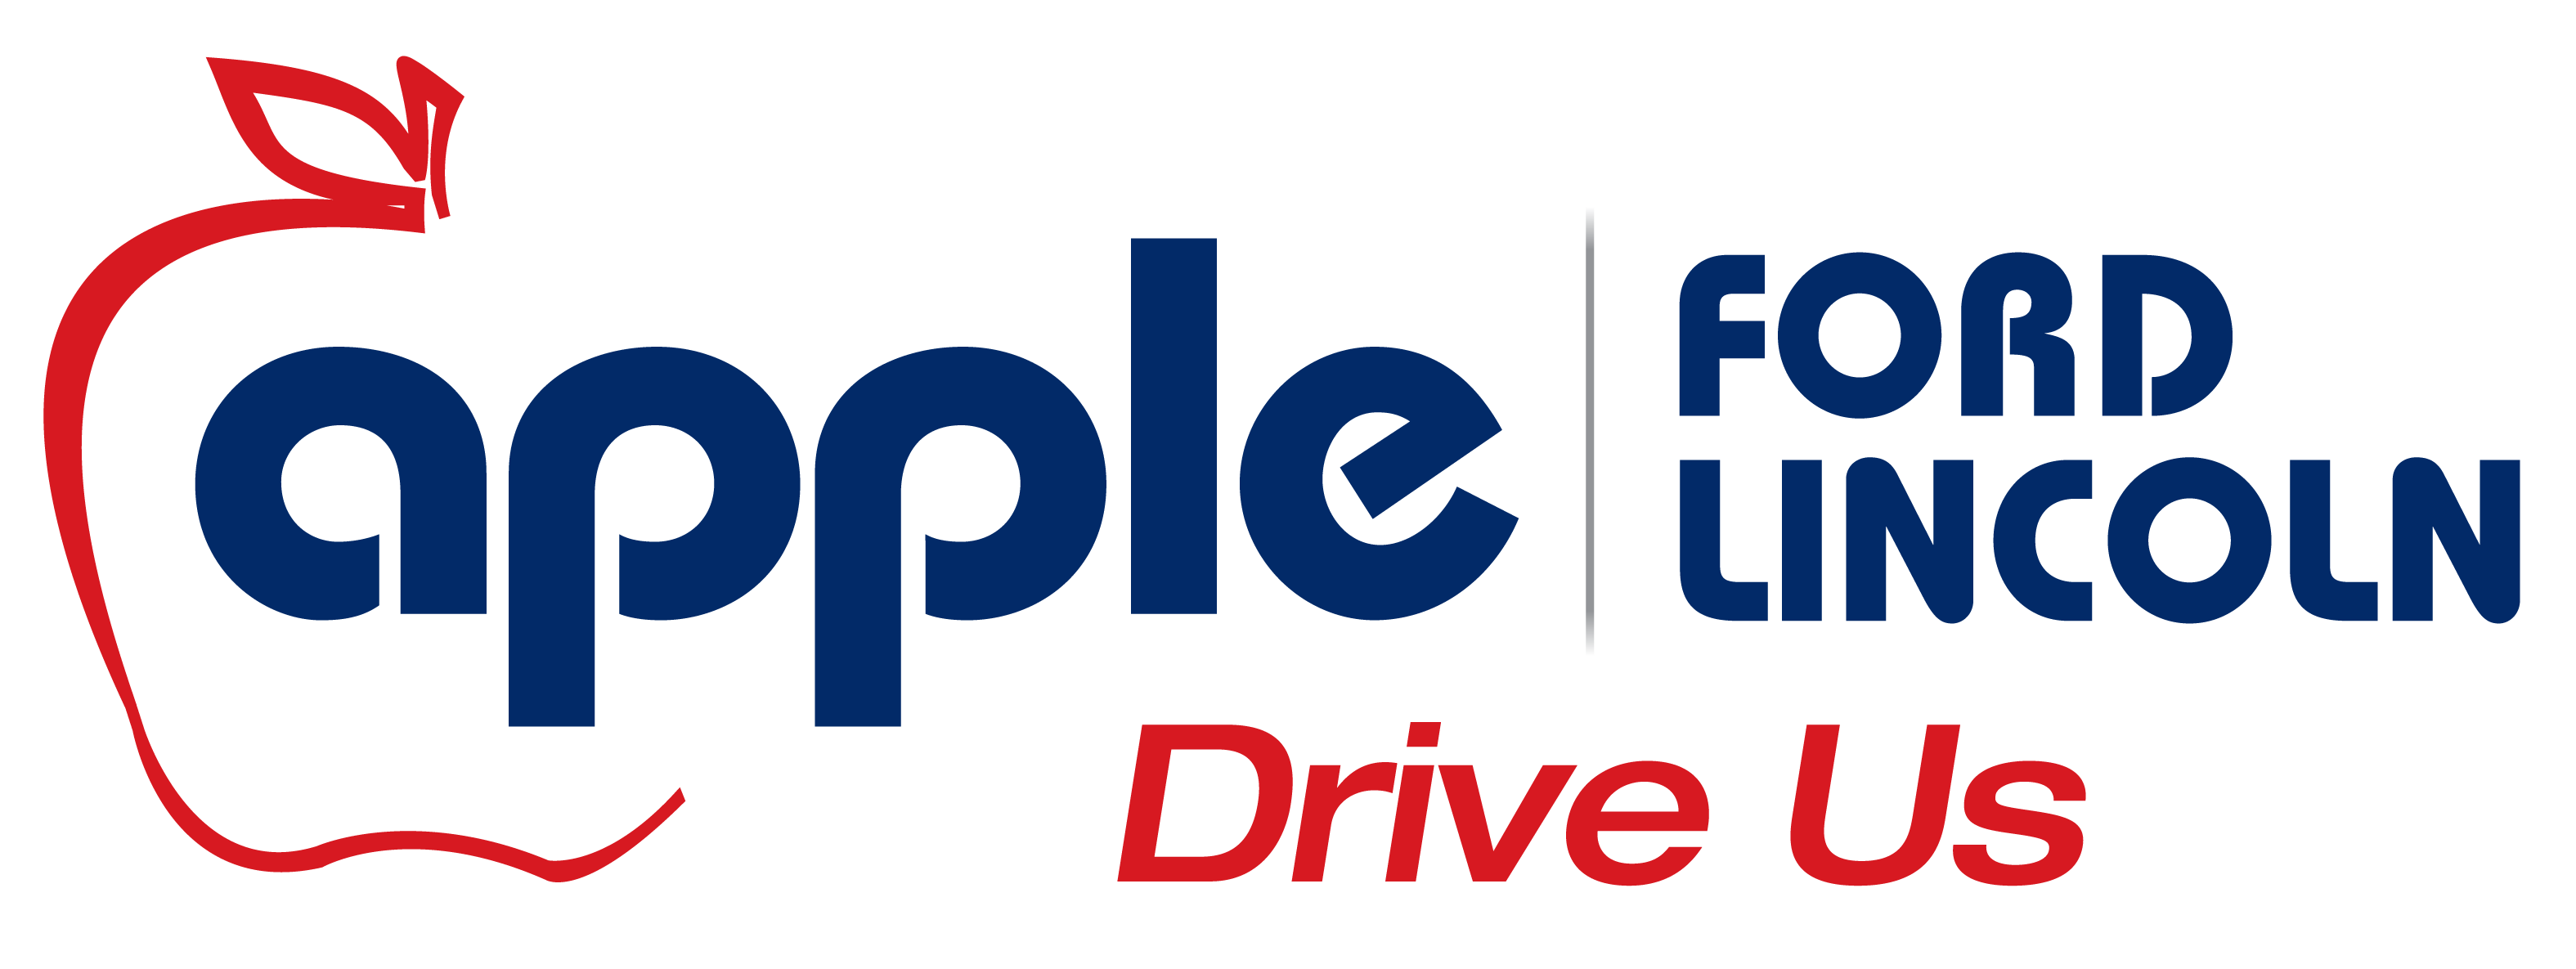 Apple Ford Lincoln - Drive Us